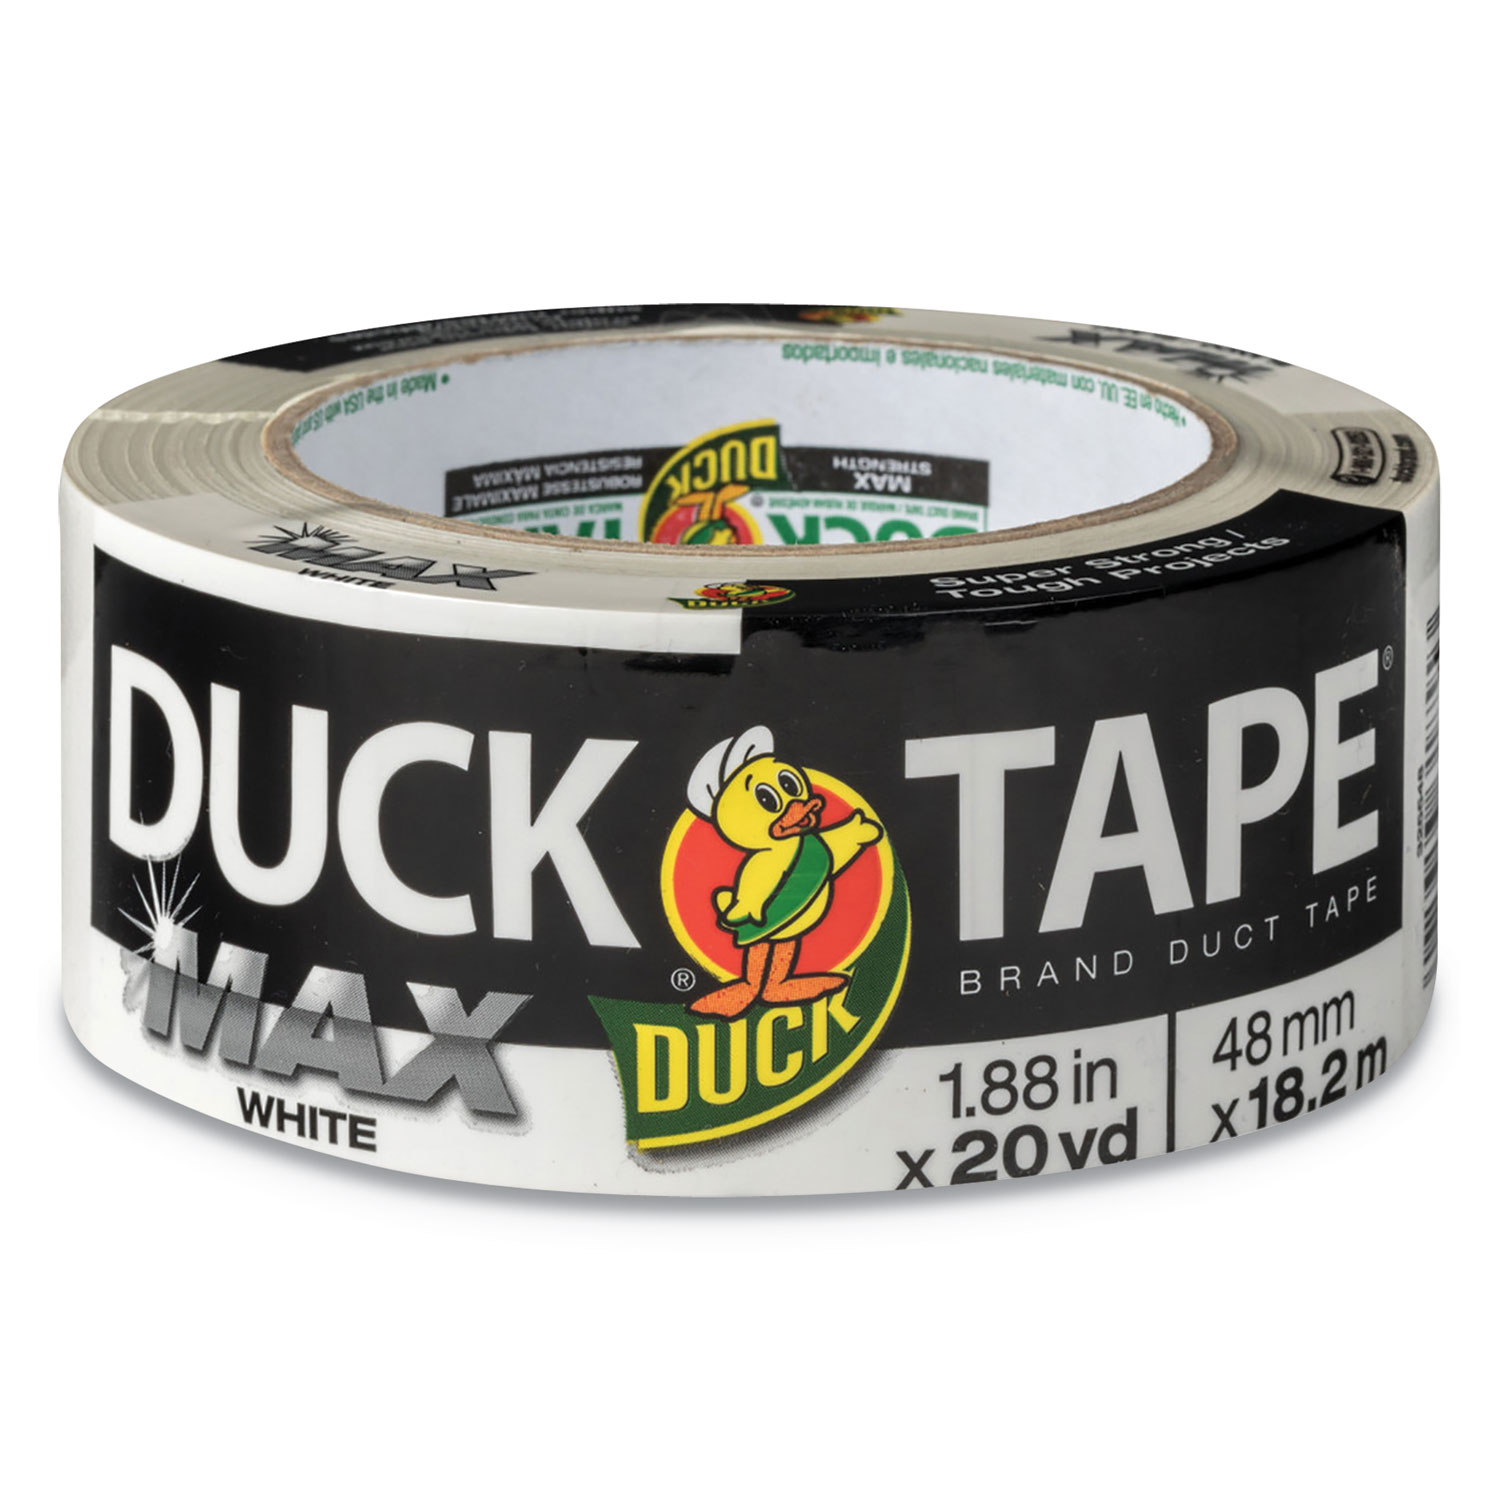  Duck 241620 MAX Duct Tape, 3 Core, 1.88 x 20 yds, White (DUC241620) 